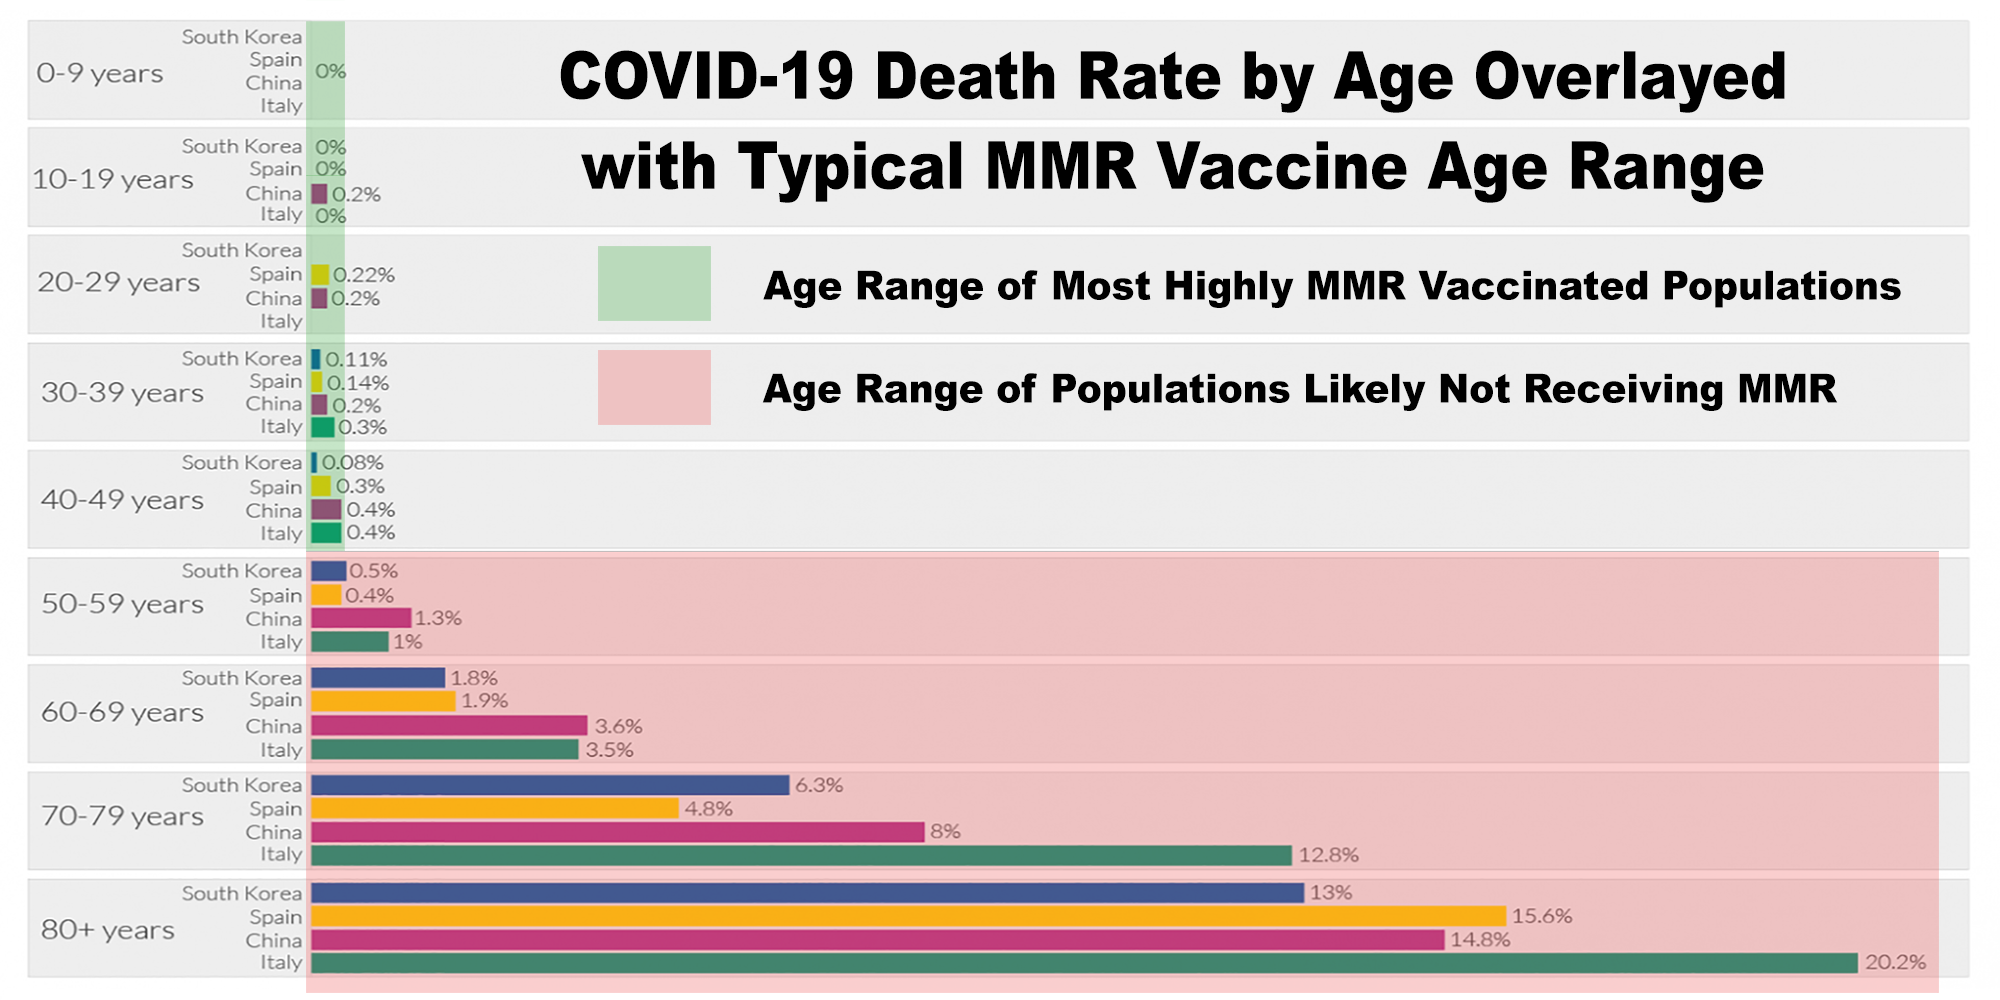 COVID-19 Death Rate by Age